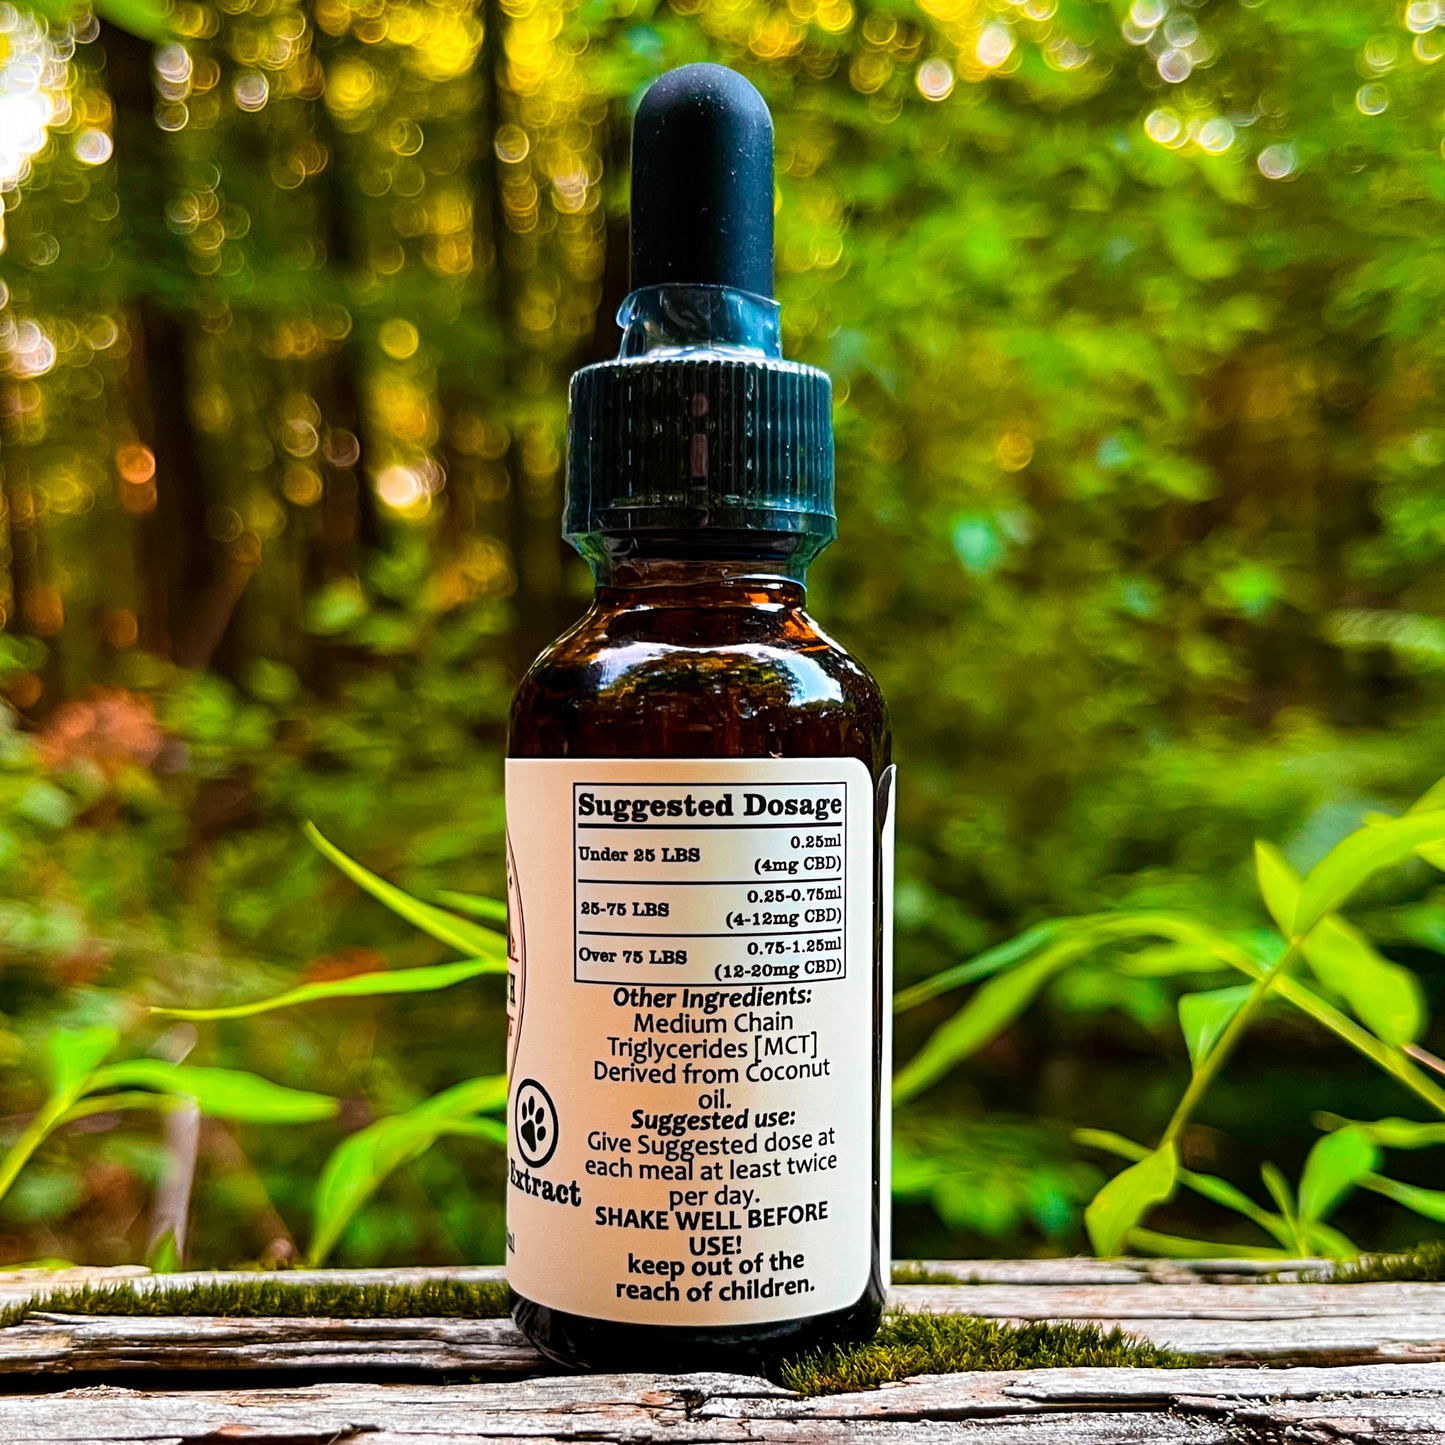 An image of a small bottle labeled Dark Earth Farms Full Spectrum Hemp Extract for Pets, featuring a green and yellow label with the brand name and product information. The bottle contains 500mg of CBD oil with terpenes and cannabinoids, specifically designed for pets to help alleviate pain, anxiety, and improve sleep. The bottle is placed on a wooden surface, surrounded by hemp leaves and a small dropper next to it, ready for use.